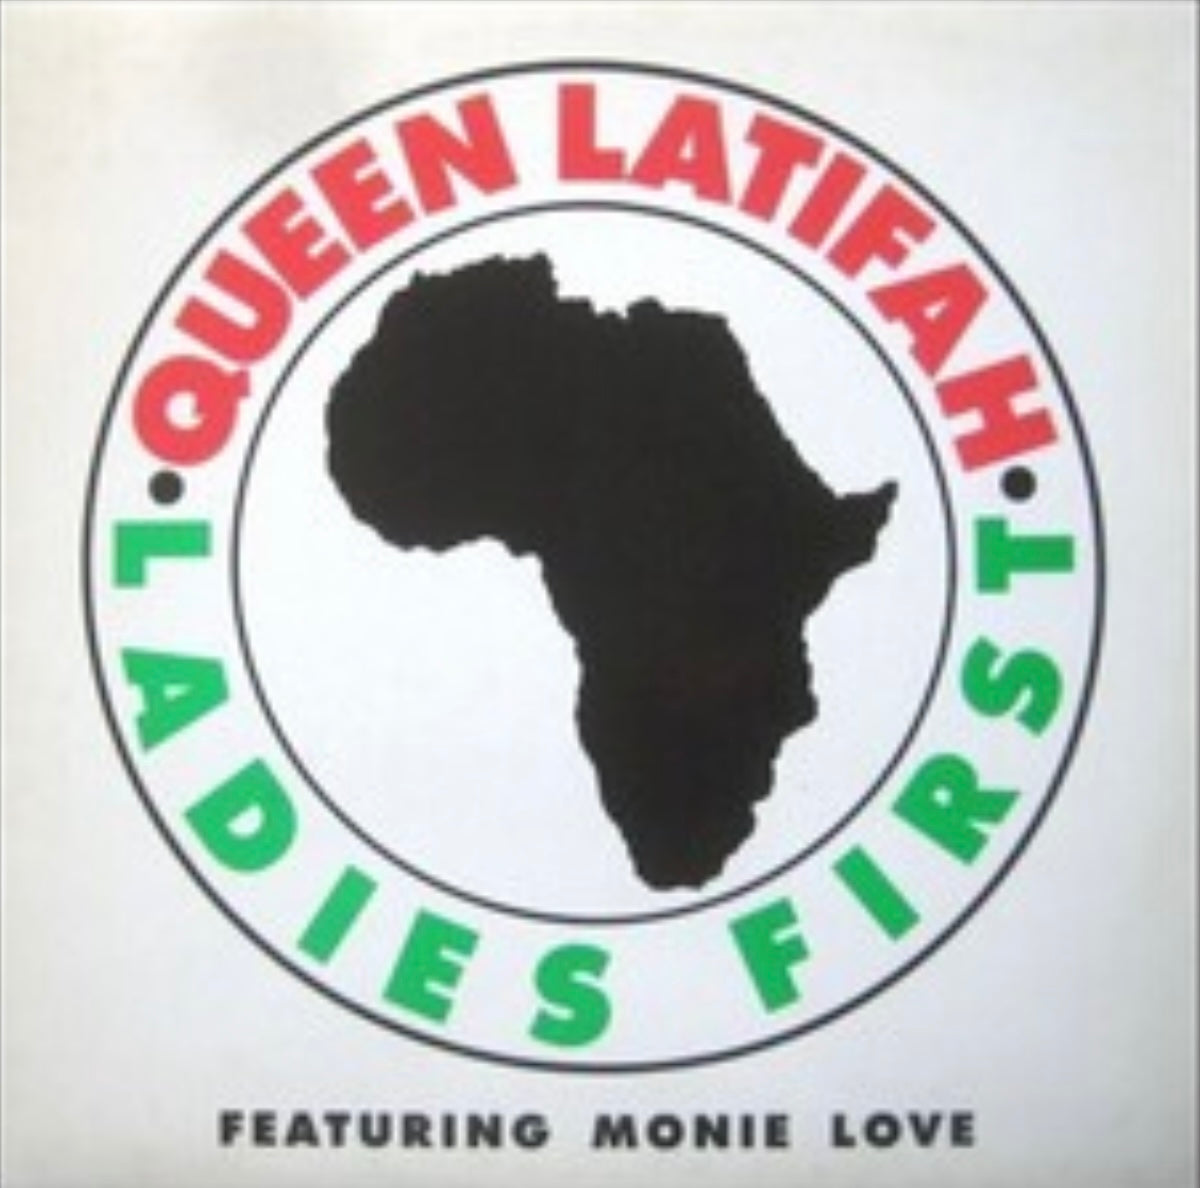 Queen Latifah - Ladies First b/w Come Into My House